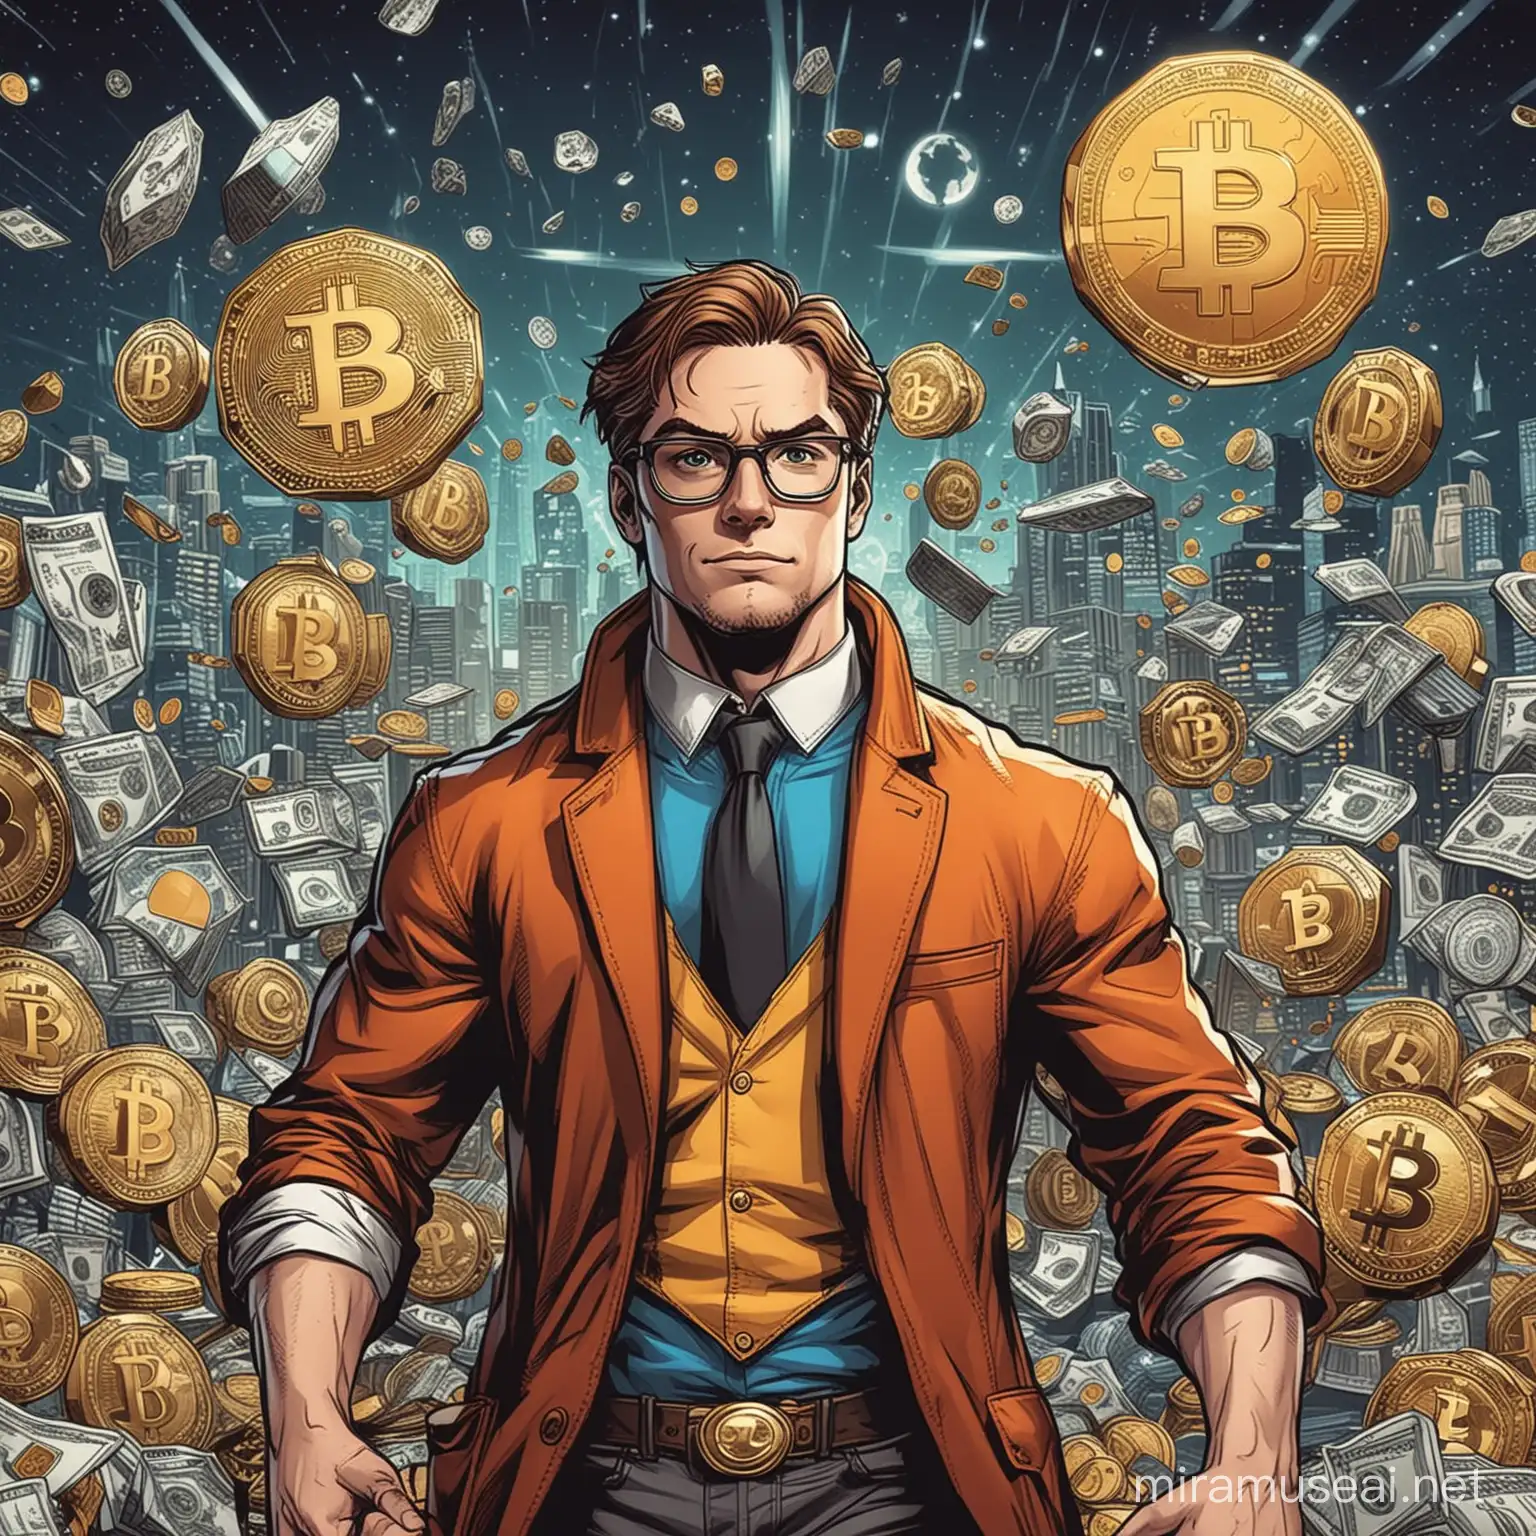 Cryptocurrency Comic Book Digital Currency Adventures and Misadventures